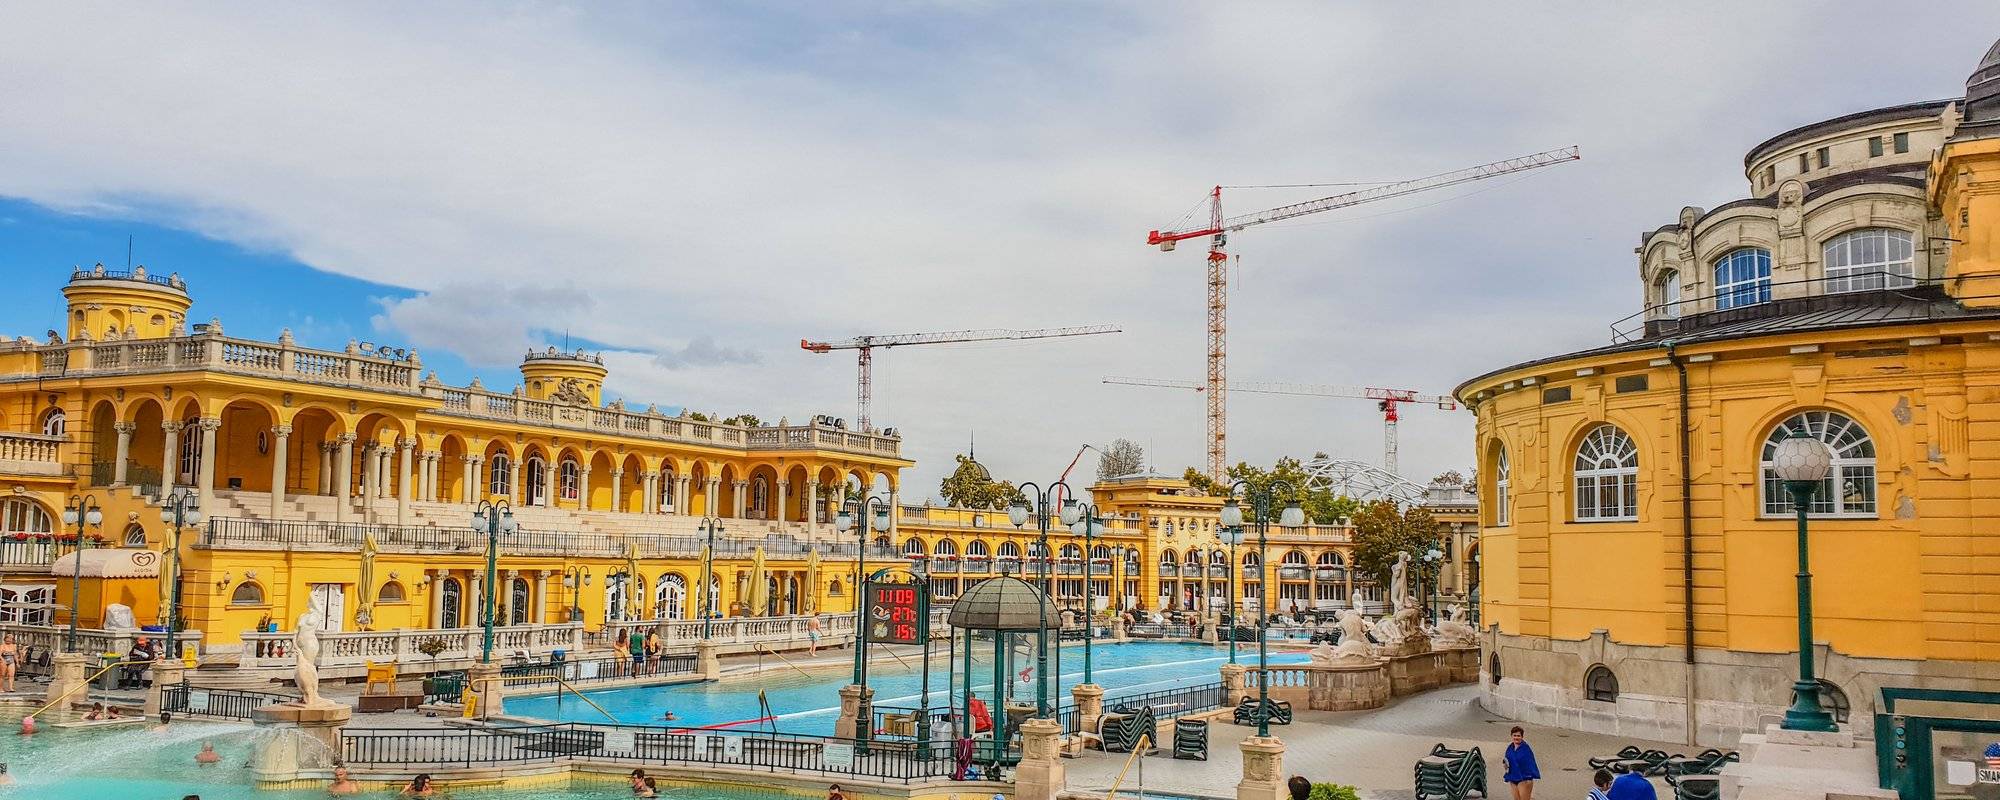 The most beautiful thermal bath in Budapest: Visiting  Széchenyi Baths